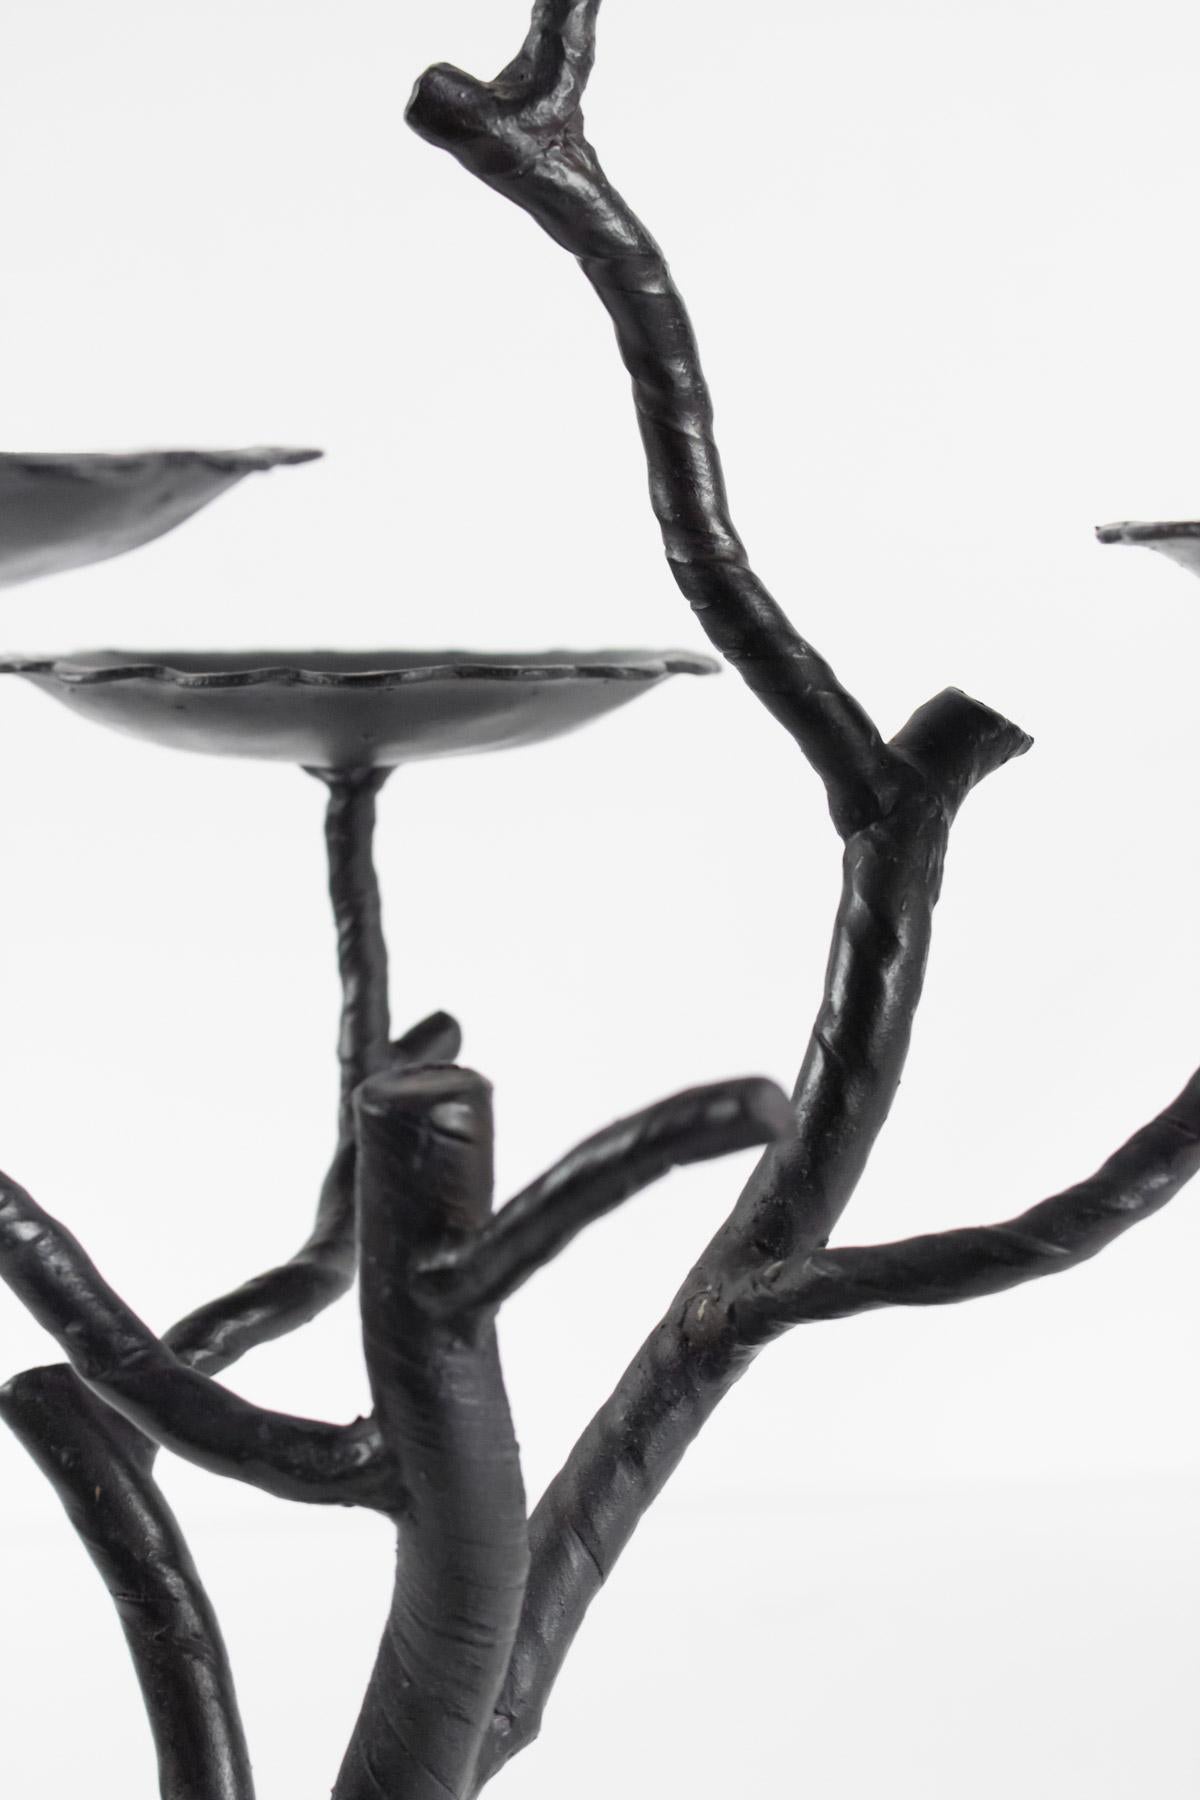 Metal Pair of Candelabra 4 Branches, 20th Century, Modern Art For Sale